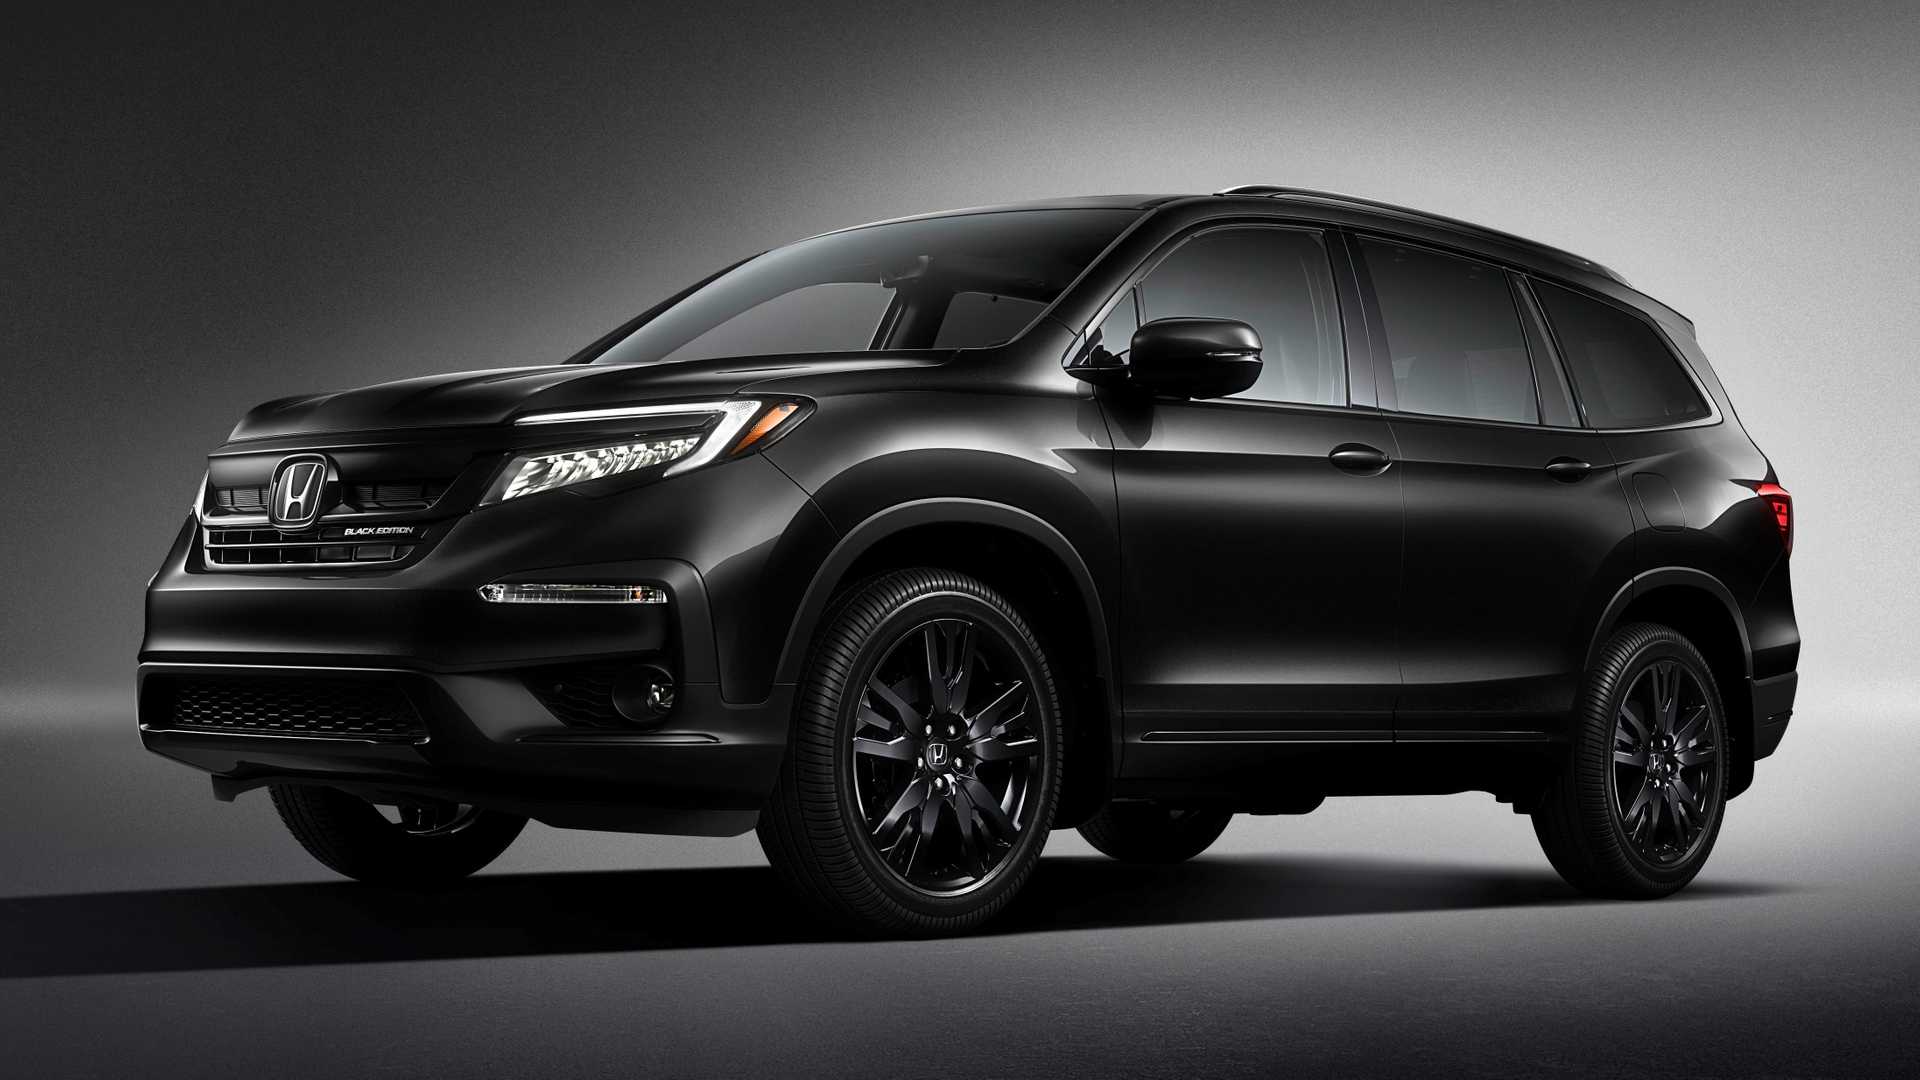 This 2020 "Black Edition" Honda Pilot Is Way Too Expensive